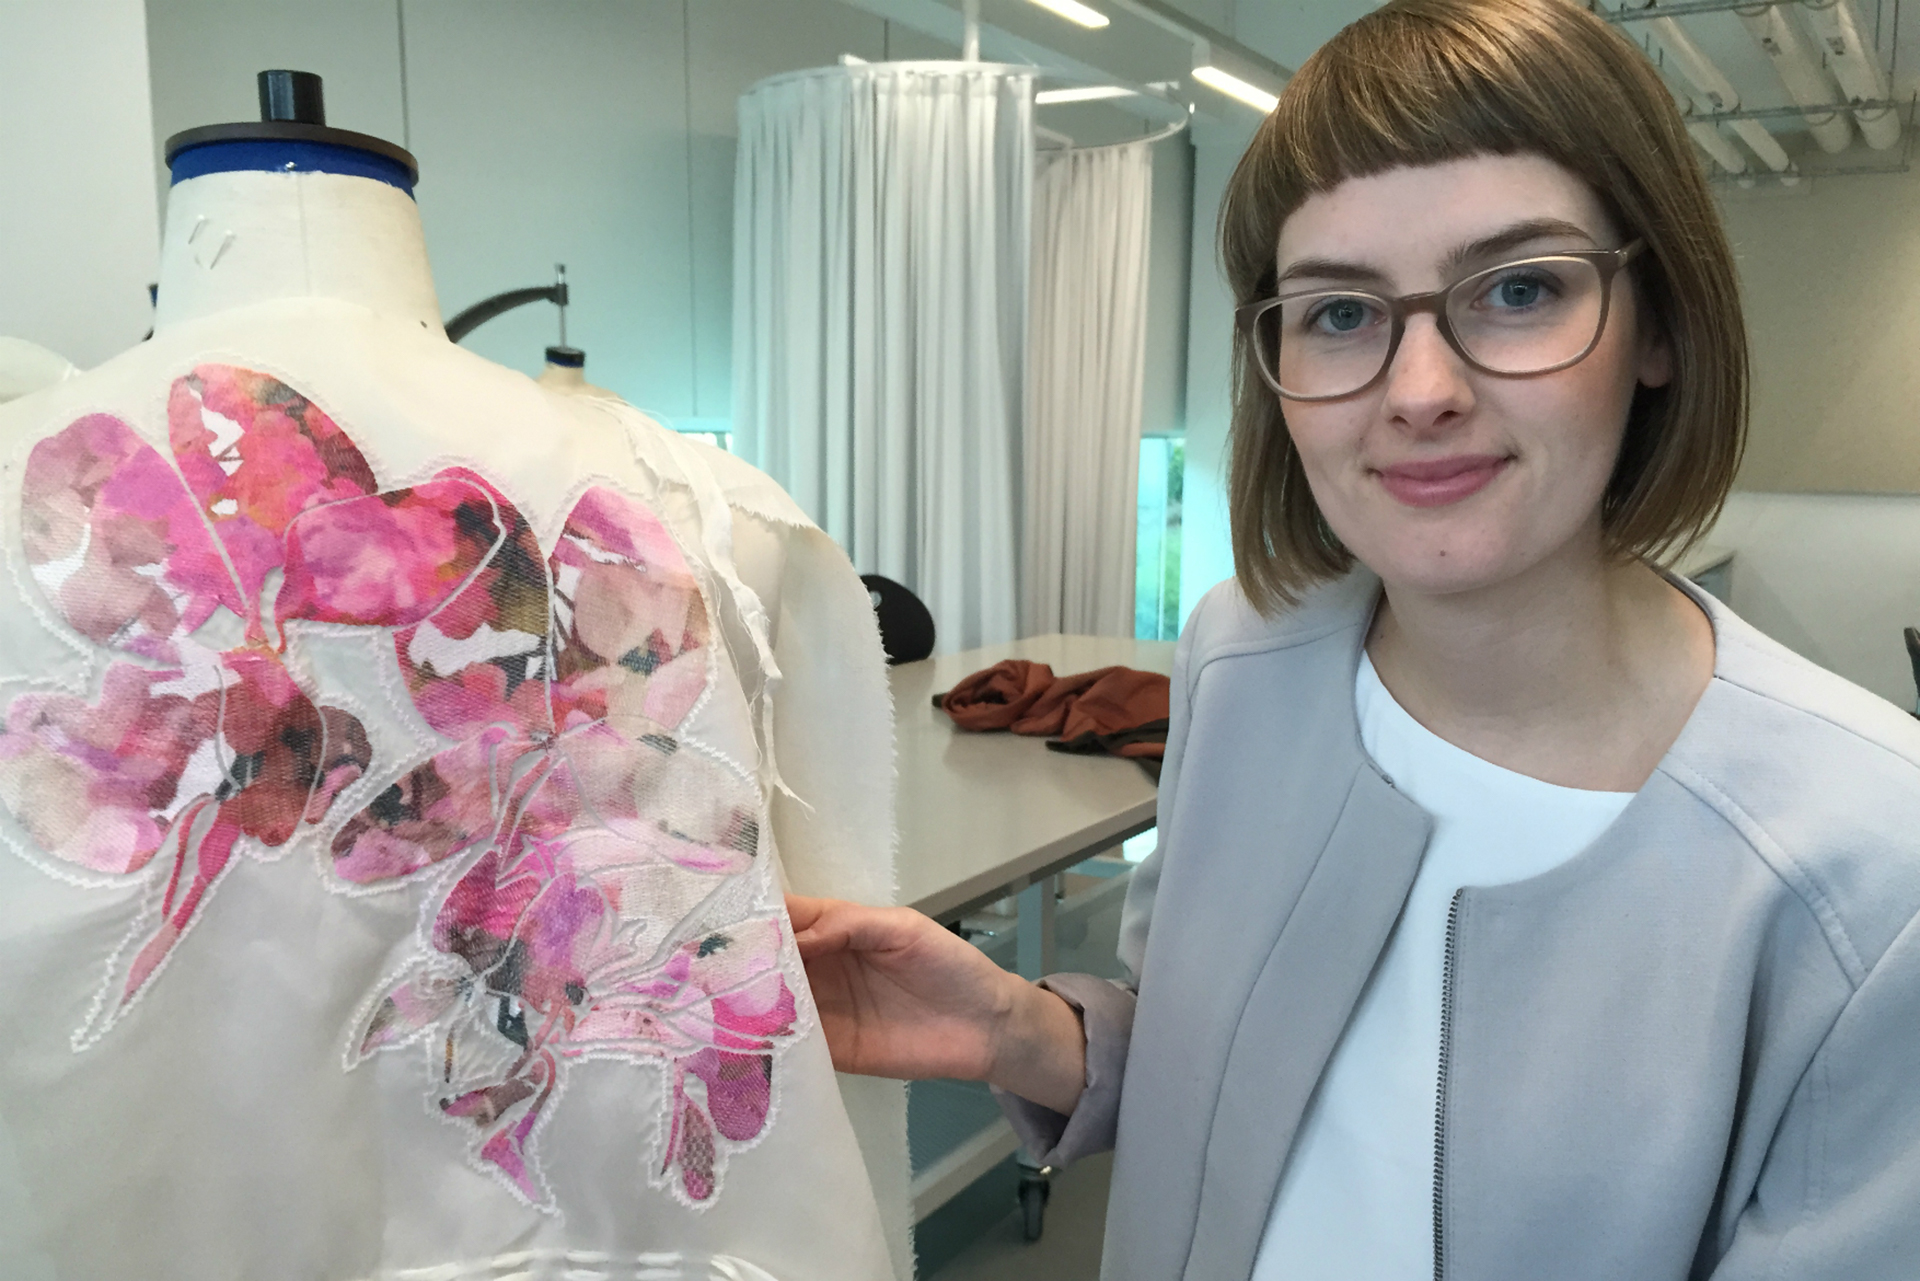 Berlin designer Ina Budde with a bespoke industrial upcycled textile garment by RMIT Master of Design student Lucie Ketelsen, based in Vietnam. Ketelsen has been studying fashion and textiles in South East Asia since moving to Vietnam nine years ago.